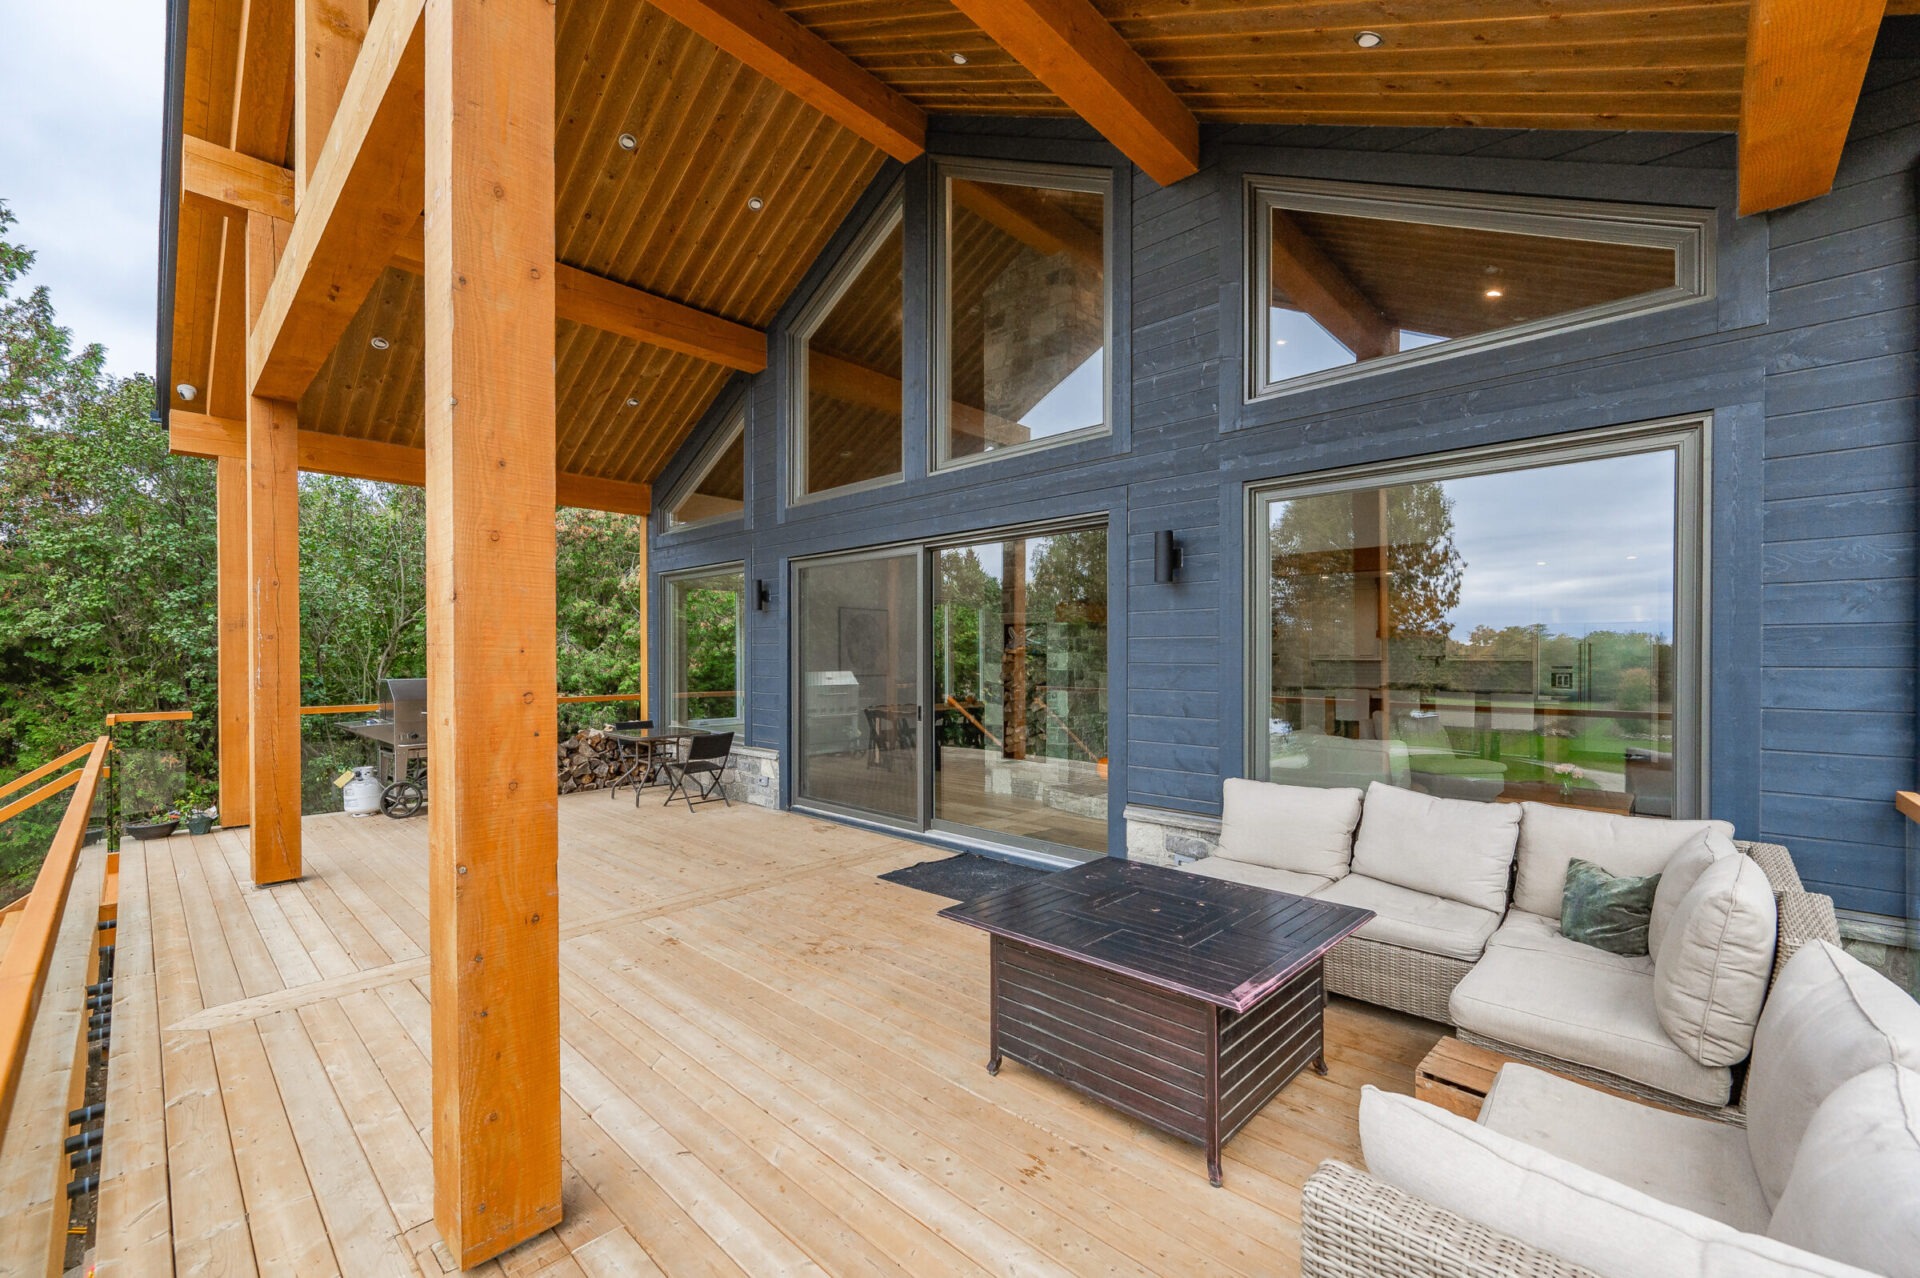 A spacious wooden deck features an outdoor seating area with cream cushions, a coffee table, and large windows on dark blue walls.